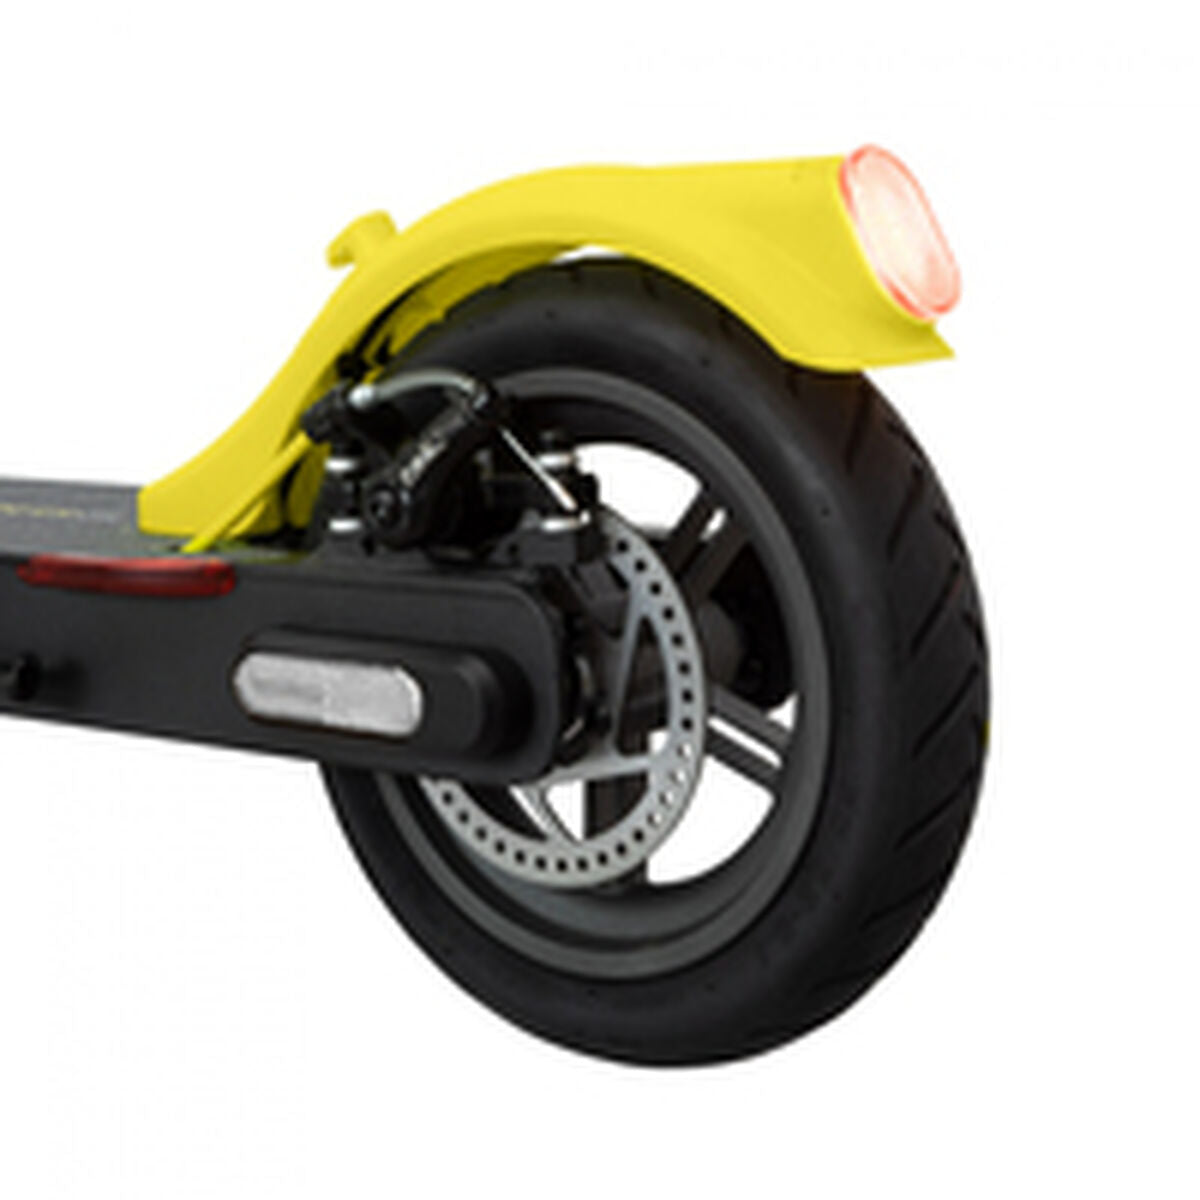 Electric Scooter Olsson Fresh Neon, Olsson, Sports and outdoors, Urban mobility, electric-scooter-olsson-fresh-neon, Brand_Olsson, category-reference-2609, category-reference-2629, category-reference-2904, category-reference-t-19681, category-reference-t-19756, category-reference-t-19876, category-reference-t-21245, Condition_NEW, deportista / en forma, Price_300 - 400, RiotNook